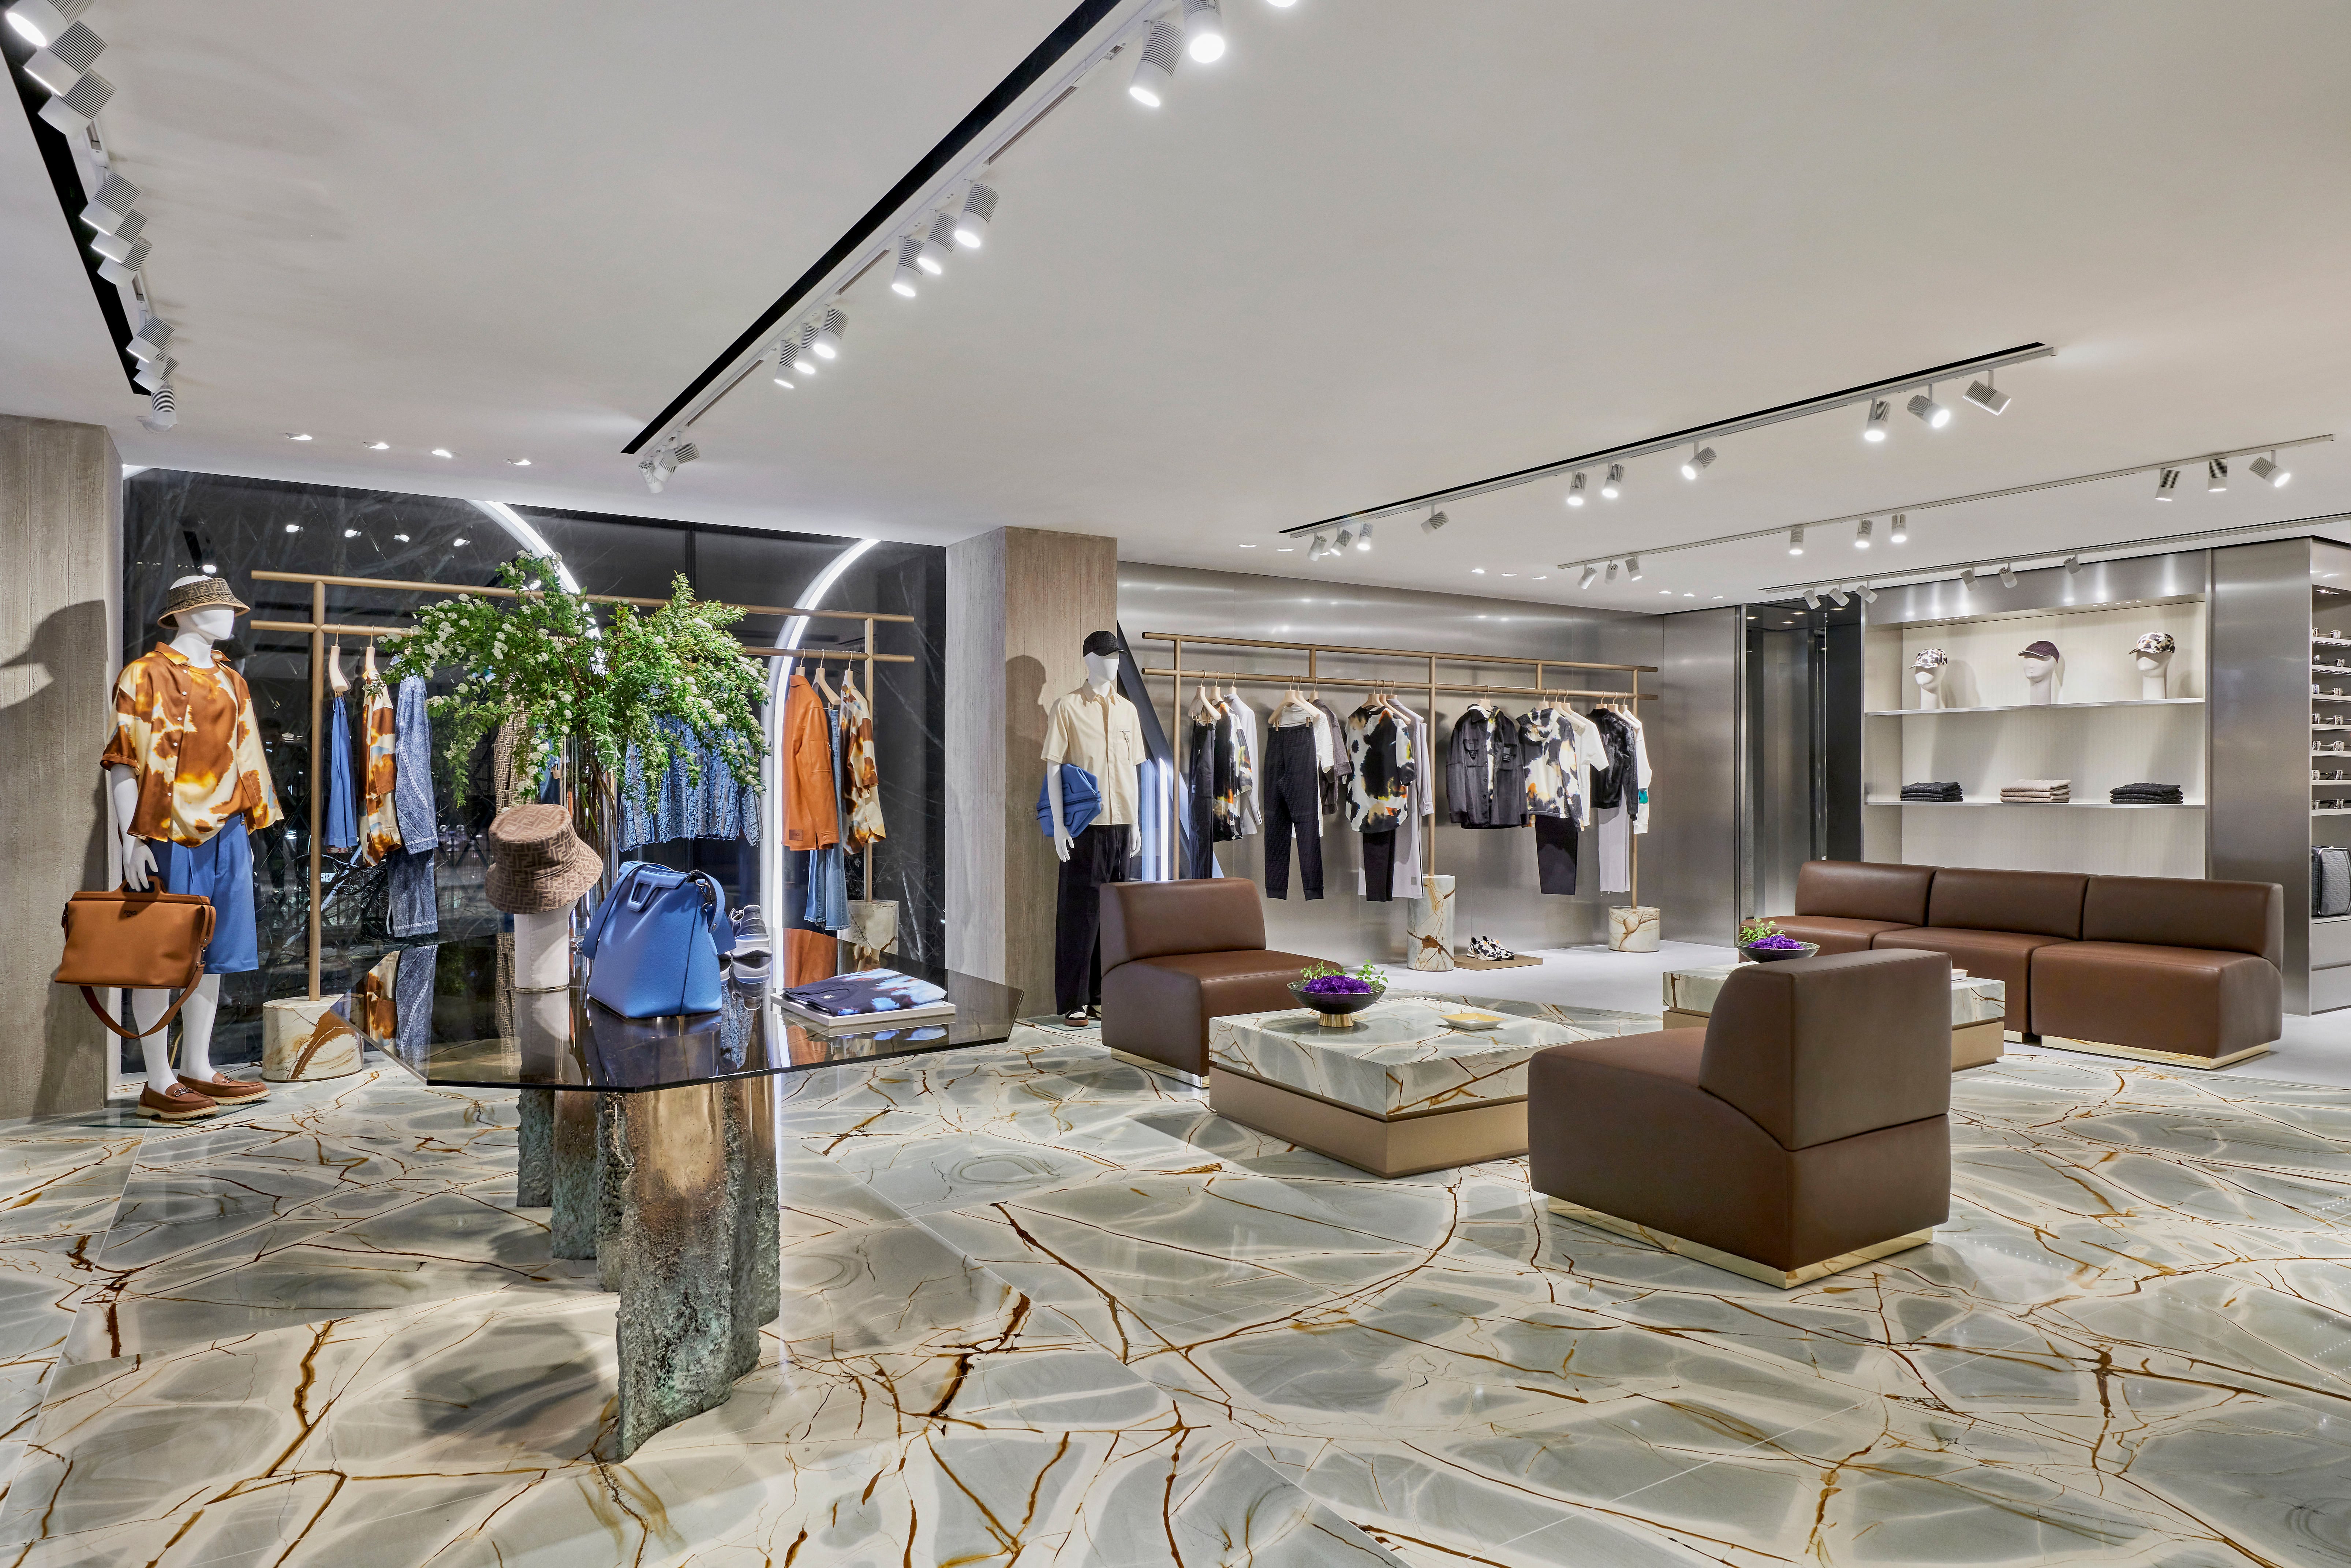 Fendi opens first flagship boutique in South Korea - Inside Retail Asia